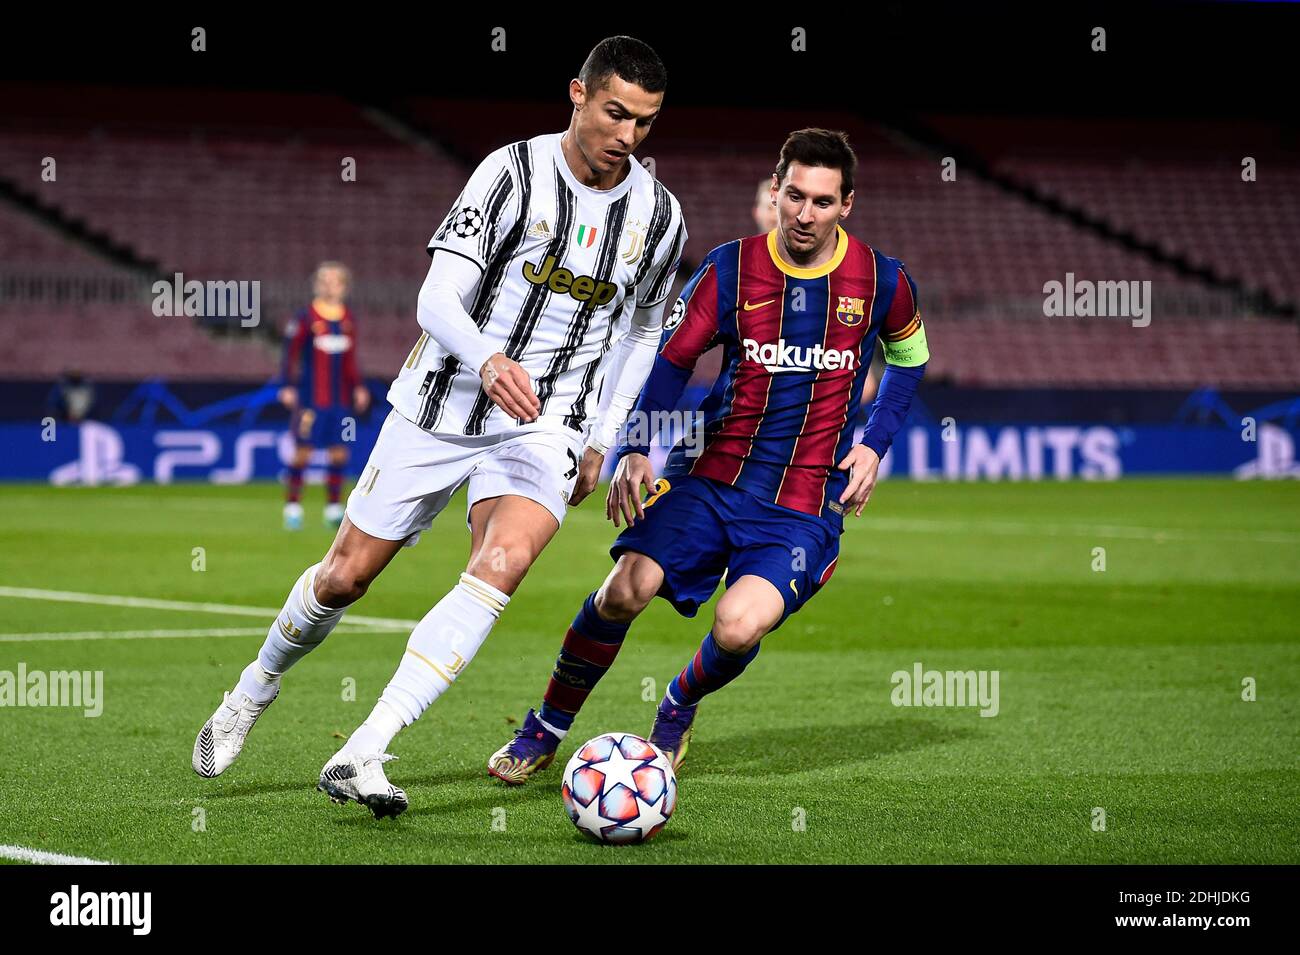 Barcelona, Spain - 08 December, 2020: Cristiano Ronaldo (L) of Juventus FC is challenged by Lionel Messi of FC Barcelona during the UEFA Champions League Group G football match between FC Barcelona and Juventus. Juventus FC won 3-0 over FC Barcelona. Credit: Nicolò Campo/Alamy Live News Stock Photo